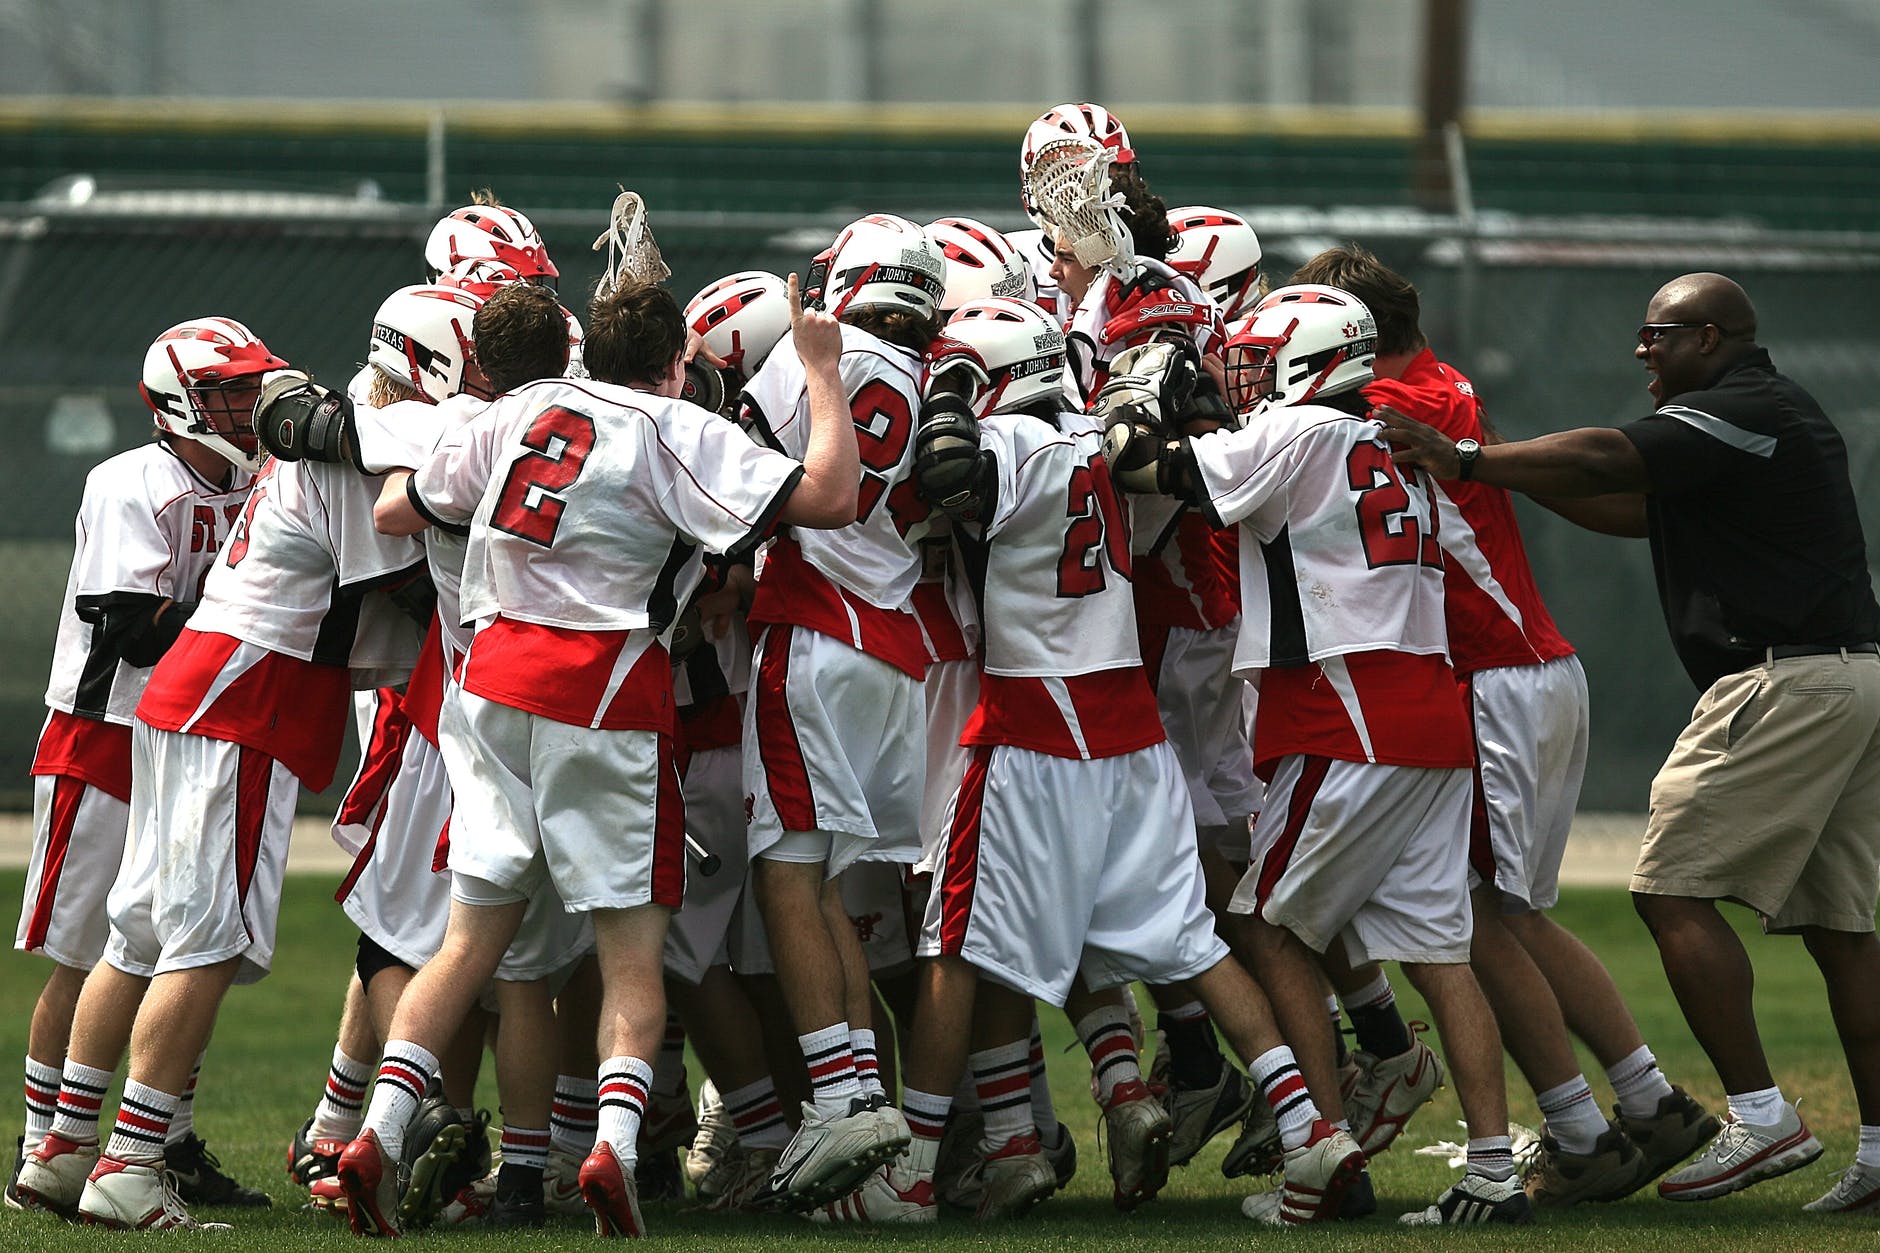 group of lacrosse players celebrating with coach during daytime